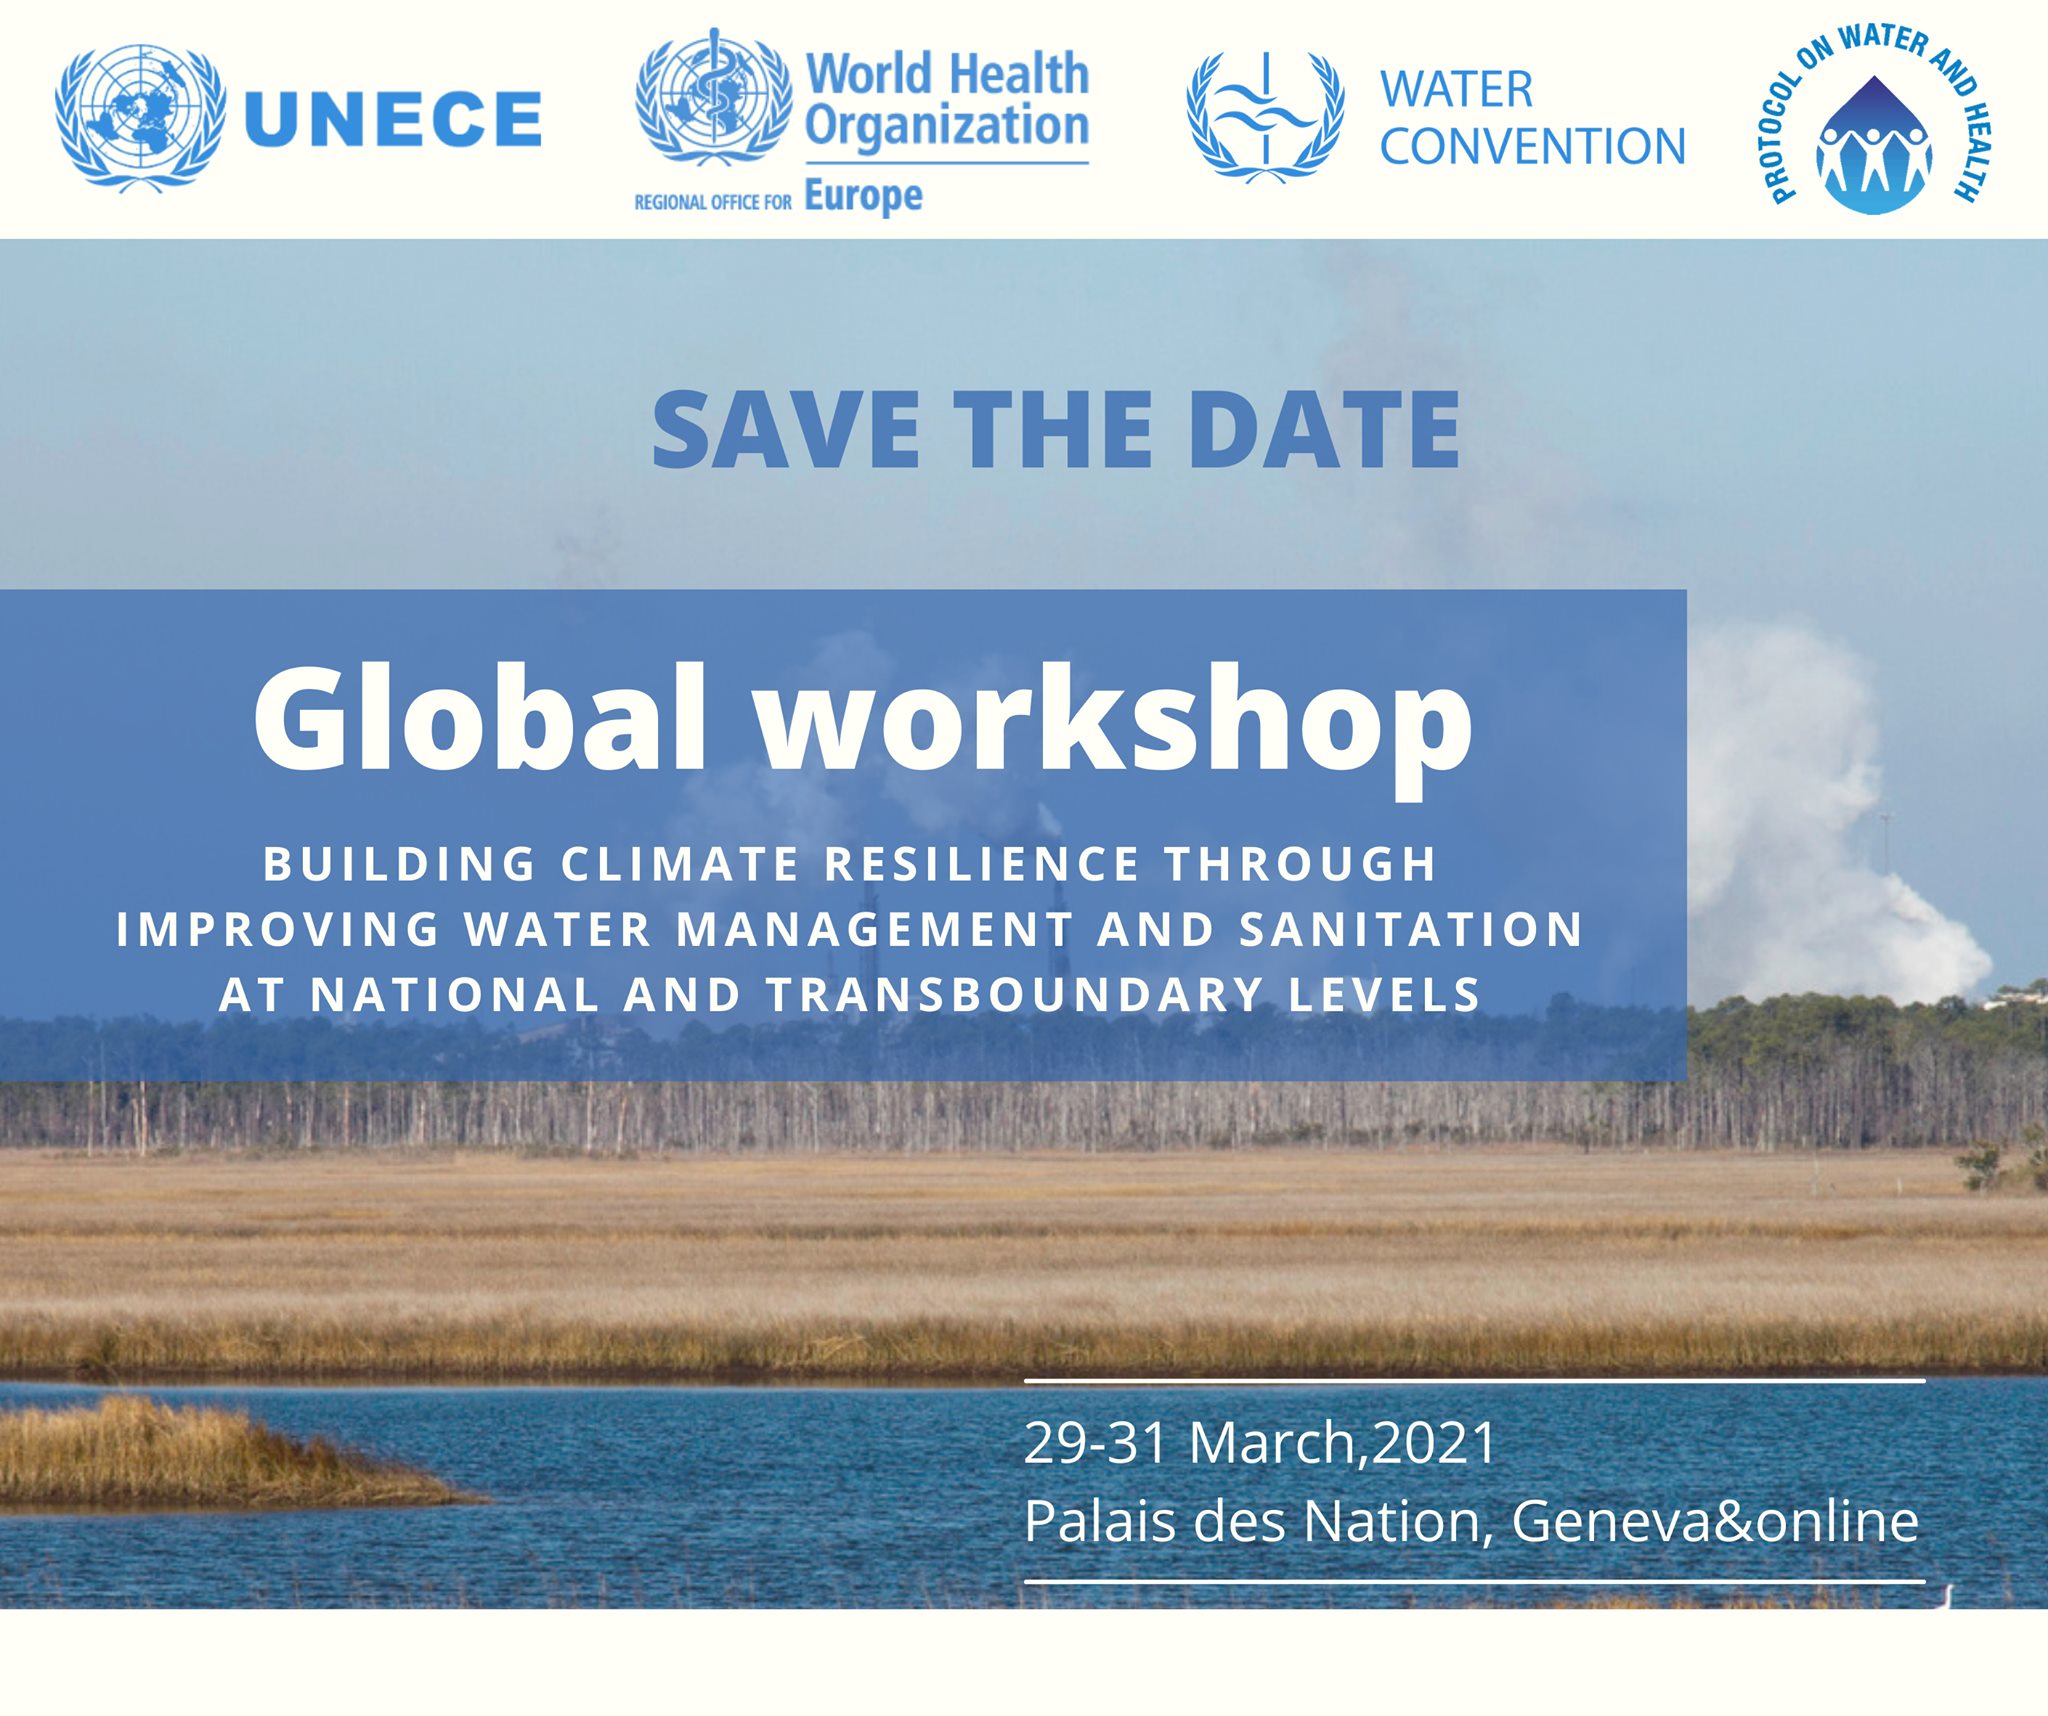 Global Workshop on Building Climate Resilience through Improving Water Management and Sanitation at National and Transboundary Levels, 29-31 March 2021